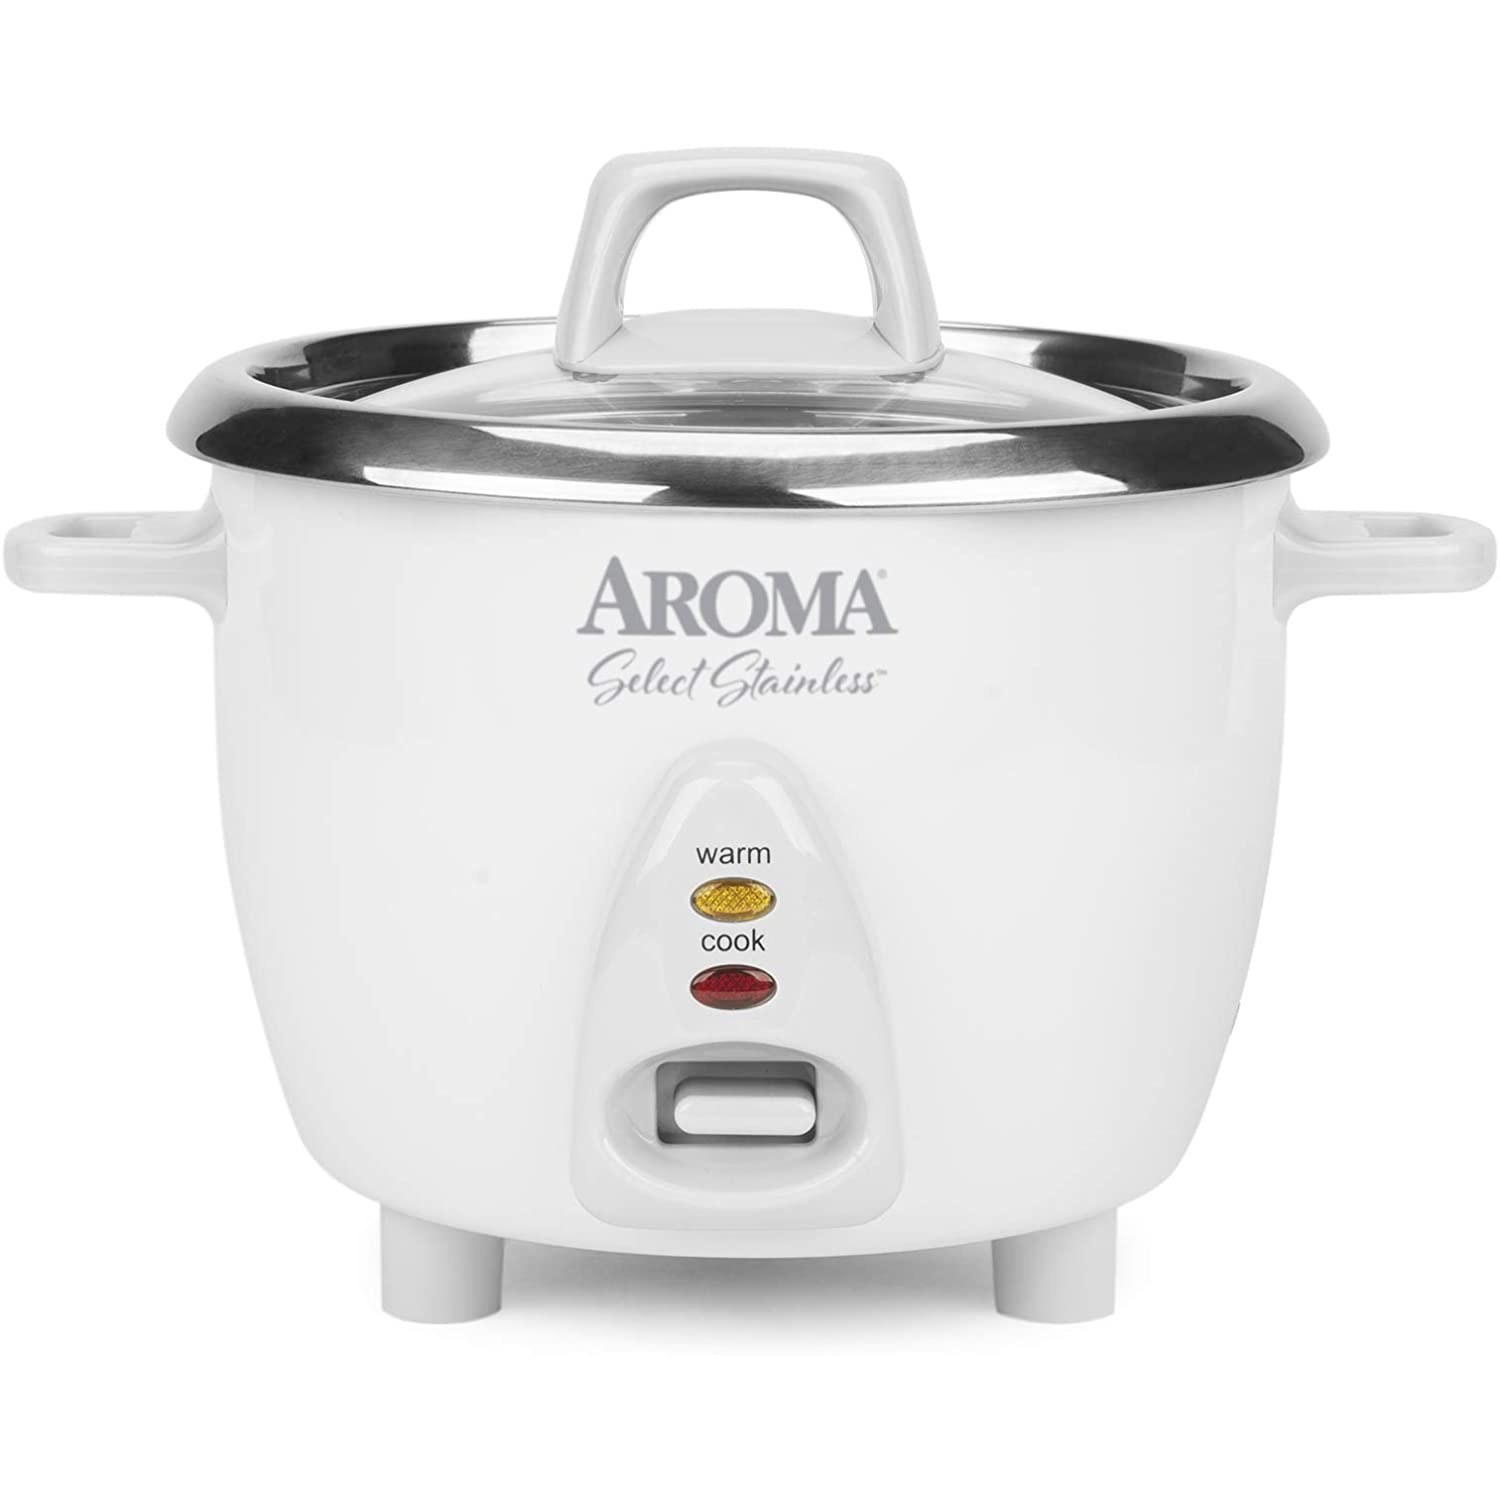 https://cdn.bestreviews.com/images/v4desktop/product-matrix/best-aroma-rice-cookers-3-cup-simply-stainless-dc3763.jpg